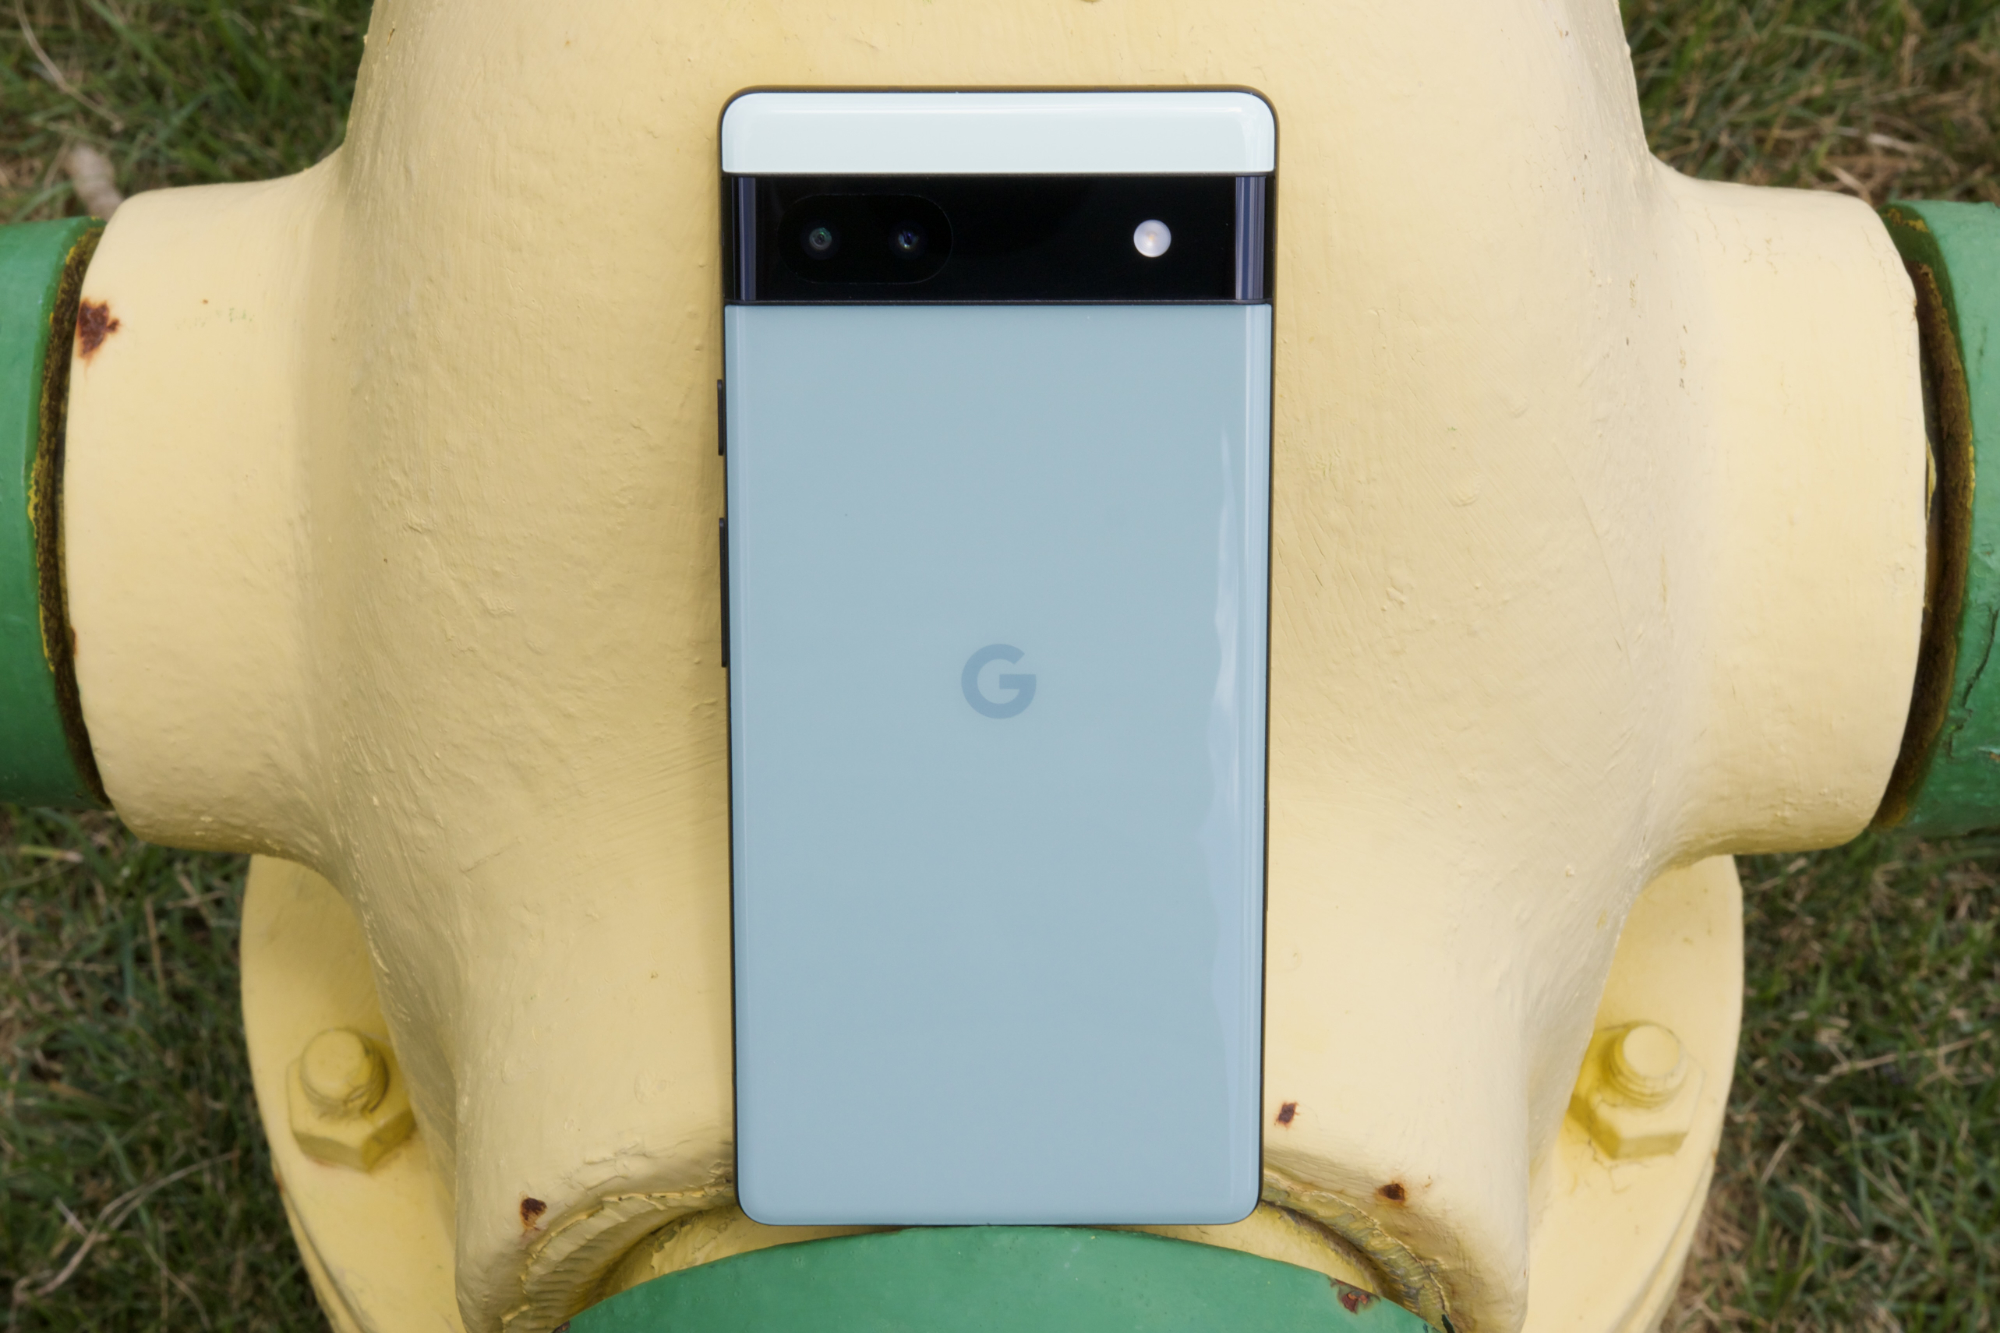 Google Pixel 6a review: The new budget Android phone to beat